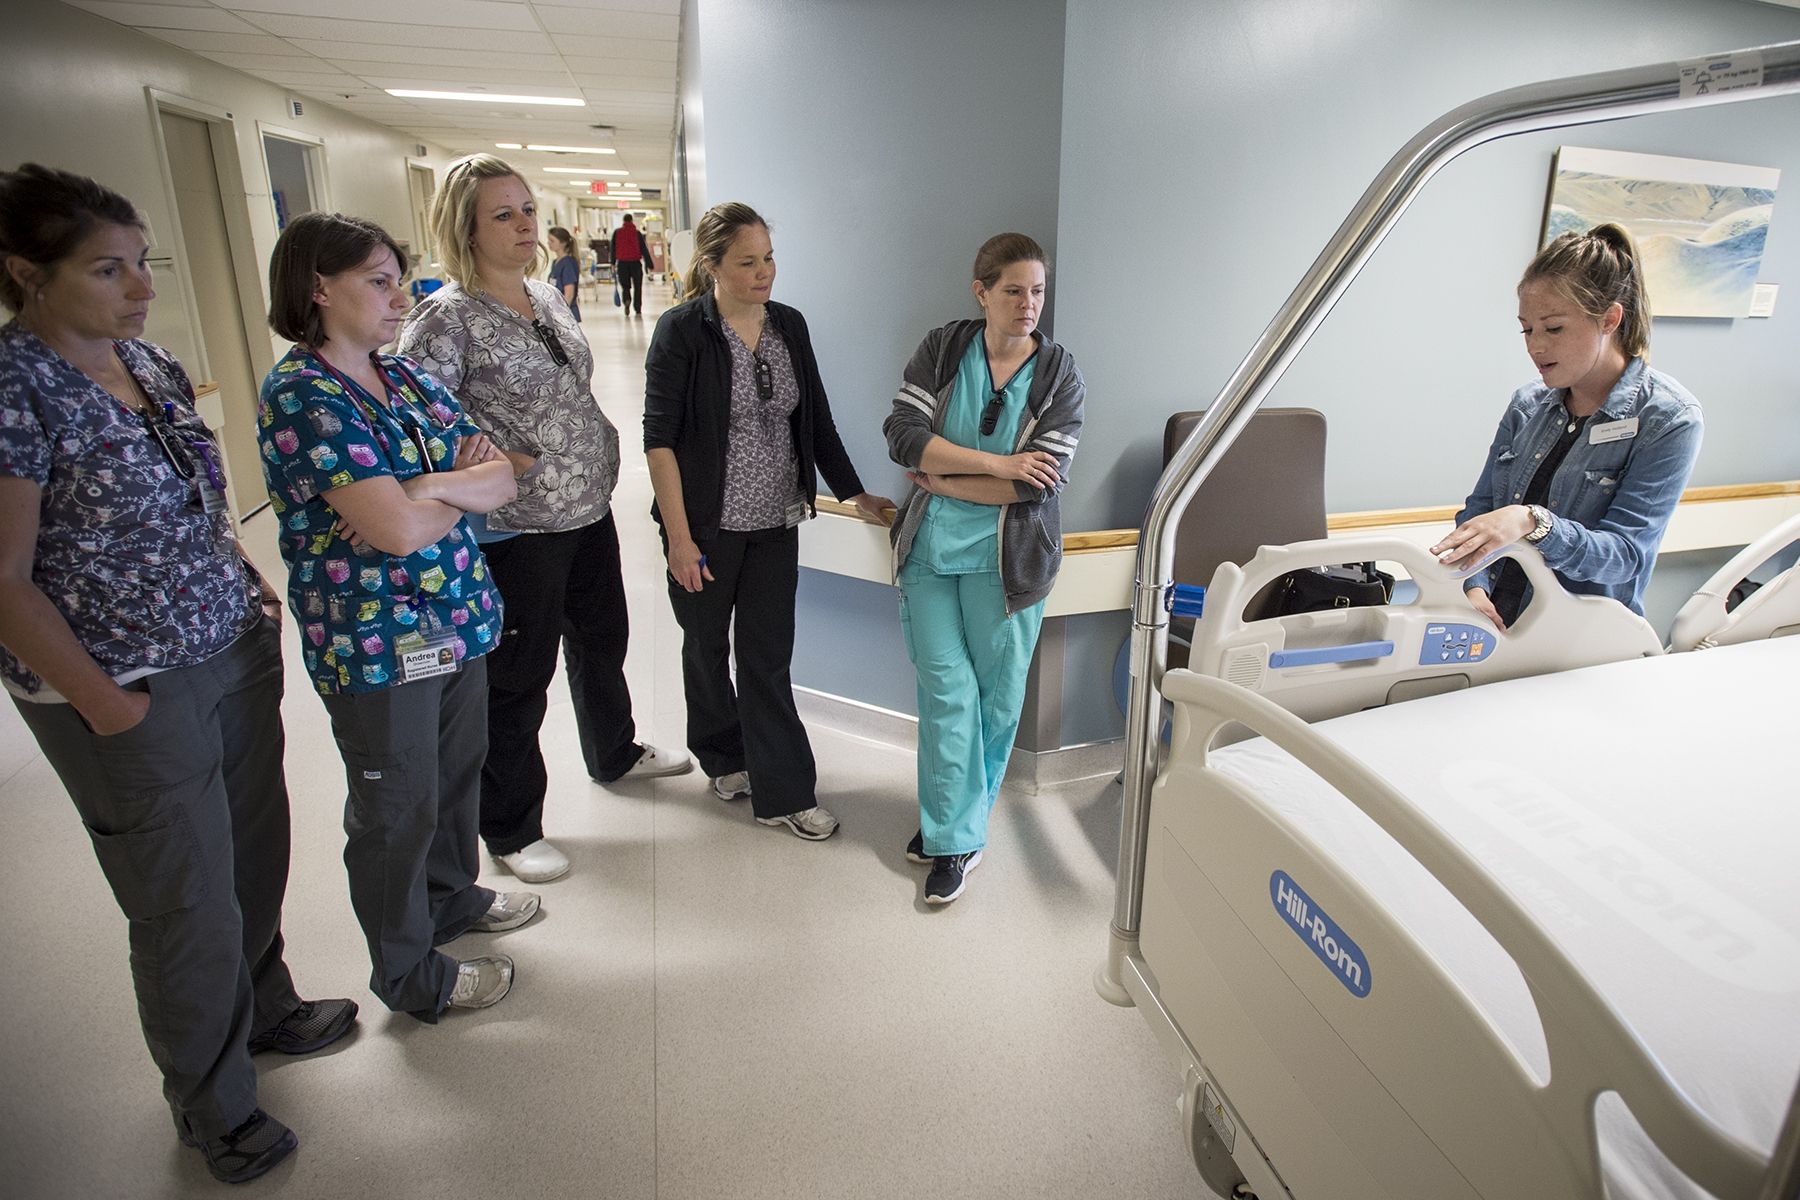 KGH Nursing staff receive in-service training and familiarization of the new Hill-Rom Advanta 2 beds arriving in patient care areas throughout the hospital.